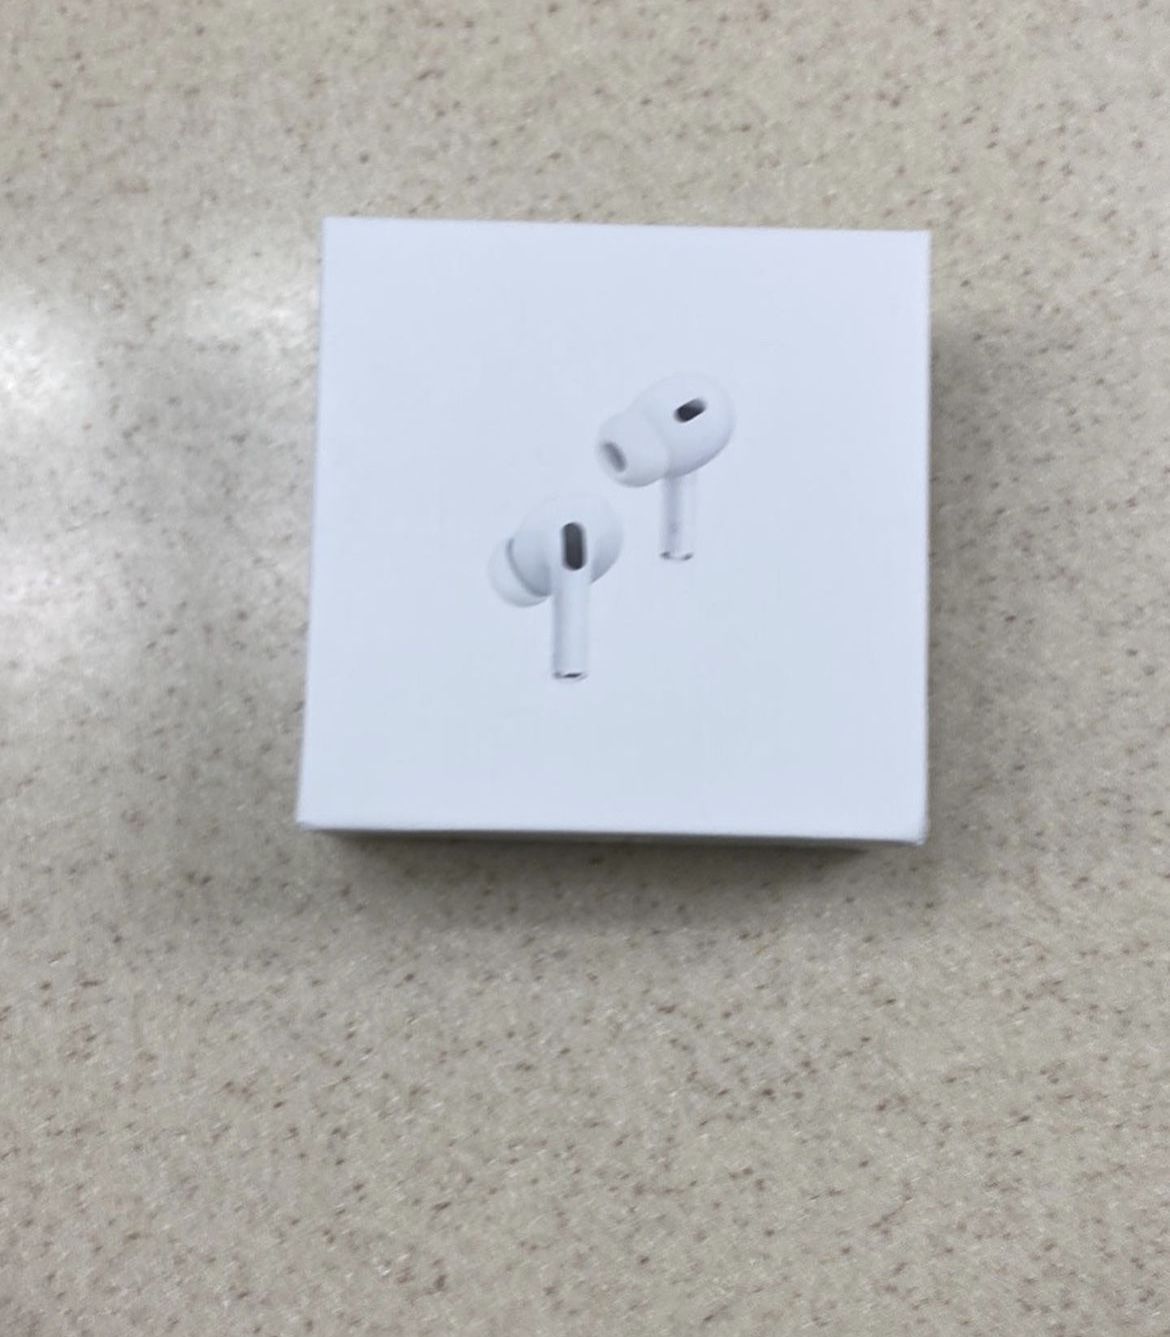 AIRPOD PRO GEN 2 WITH CHARGING CASE (the NEGOTIABLE FOR 100)